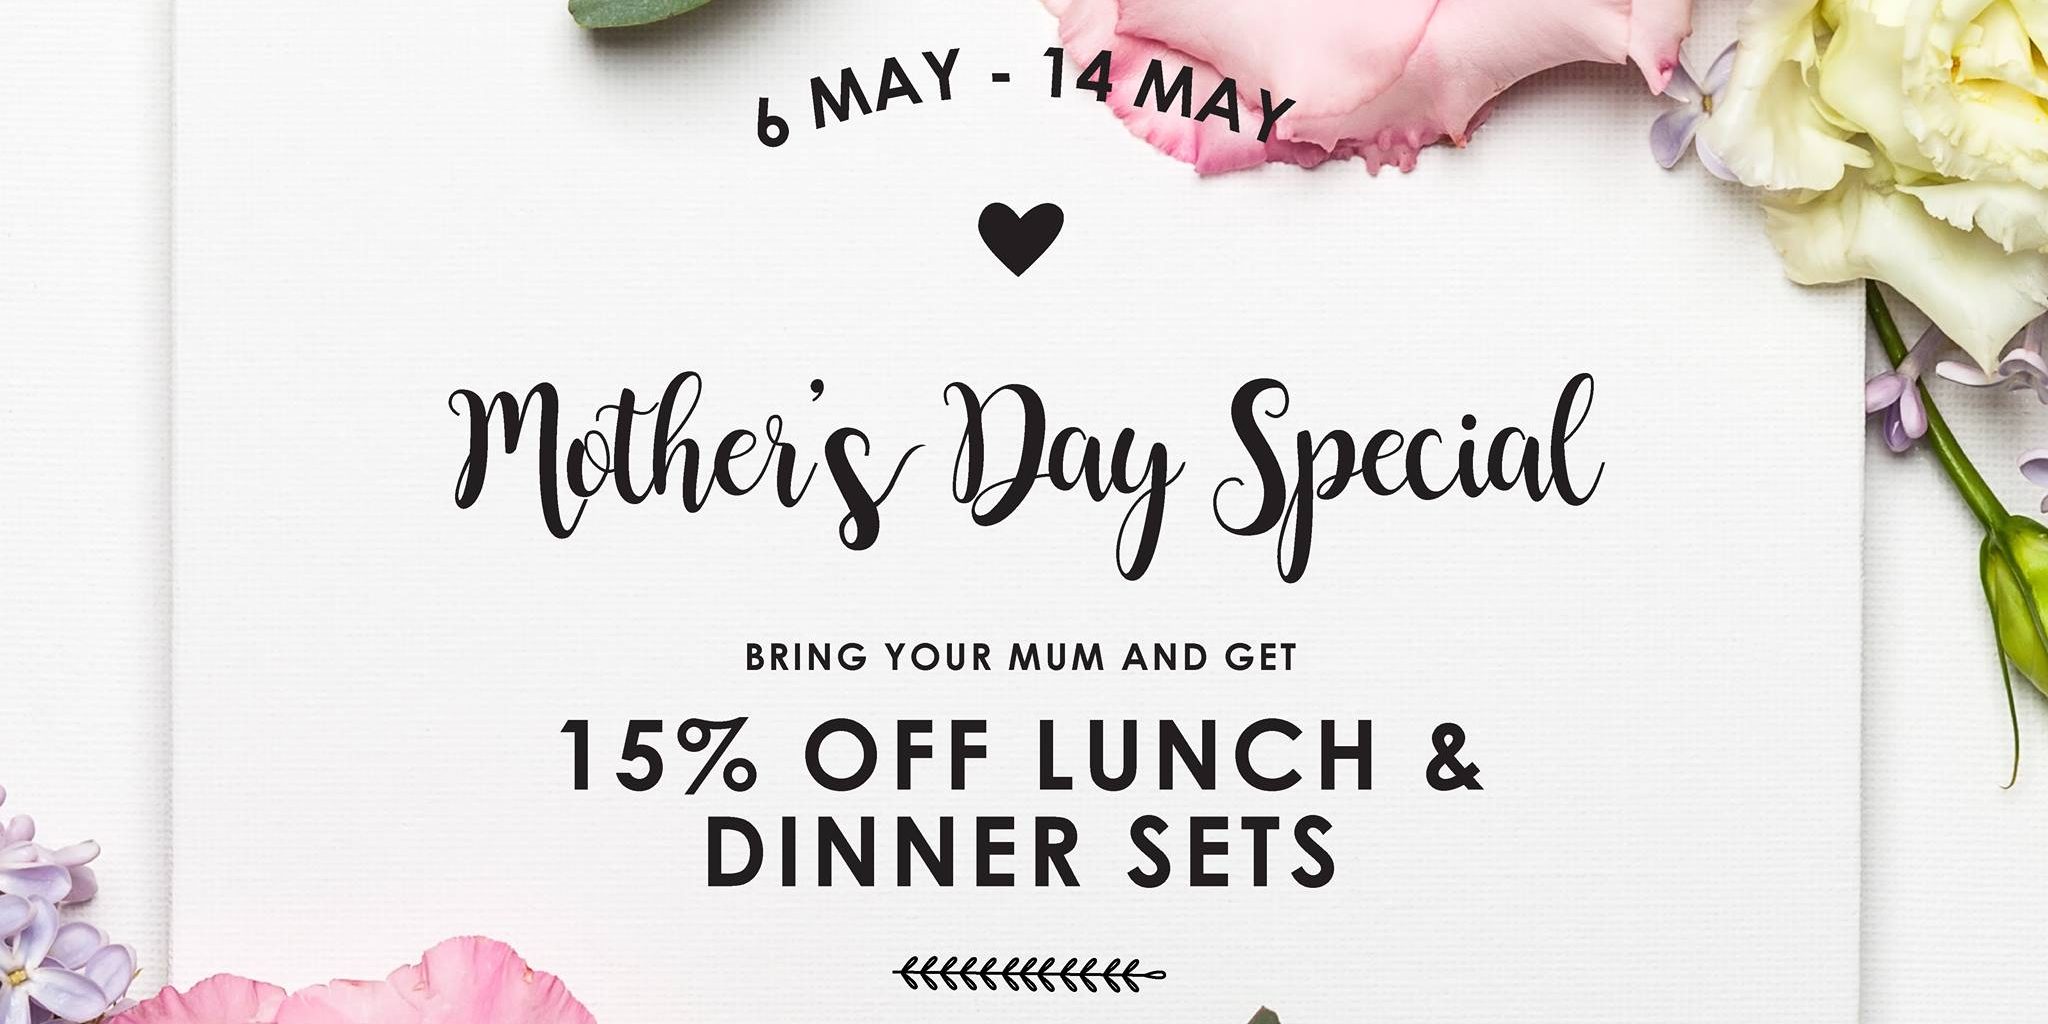 Saveur Singapore Mother’s Day 15% Off Lunch & Dinner Sets Promotion 6-14 May 2017